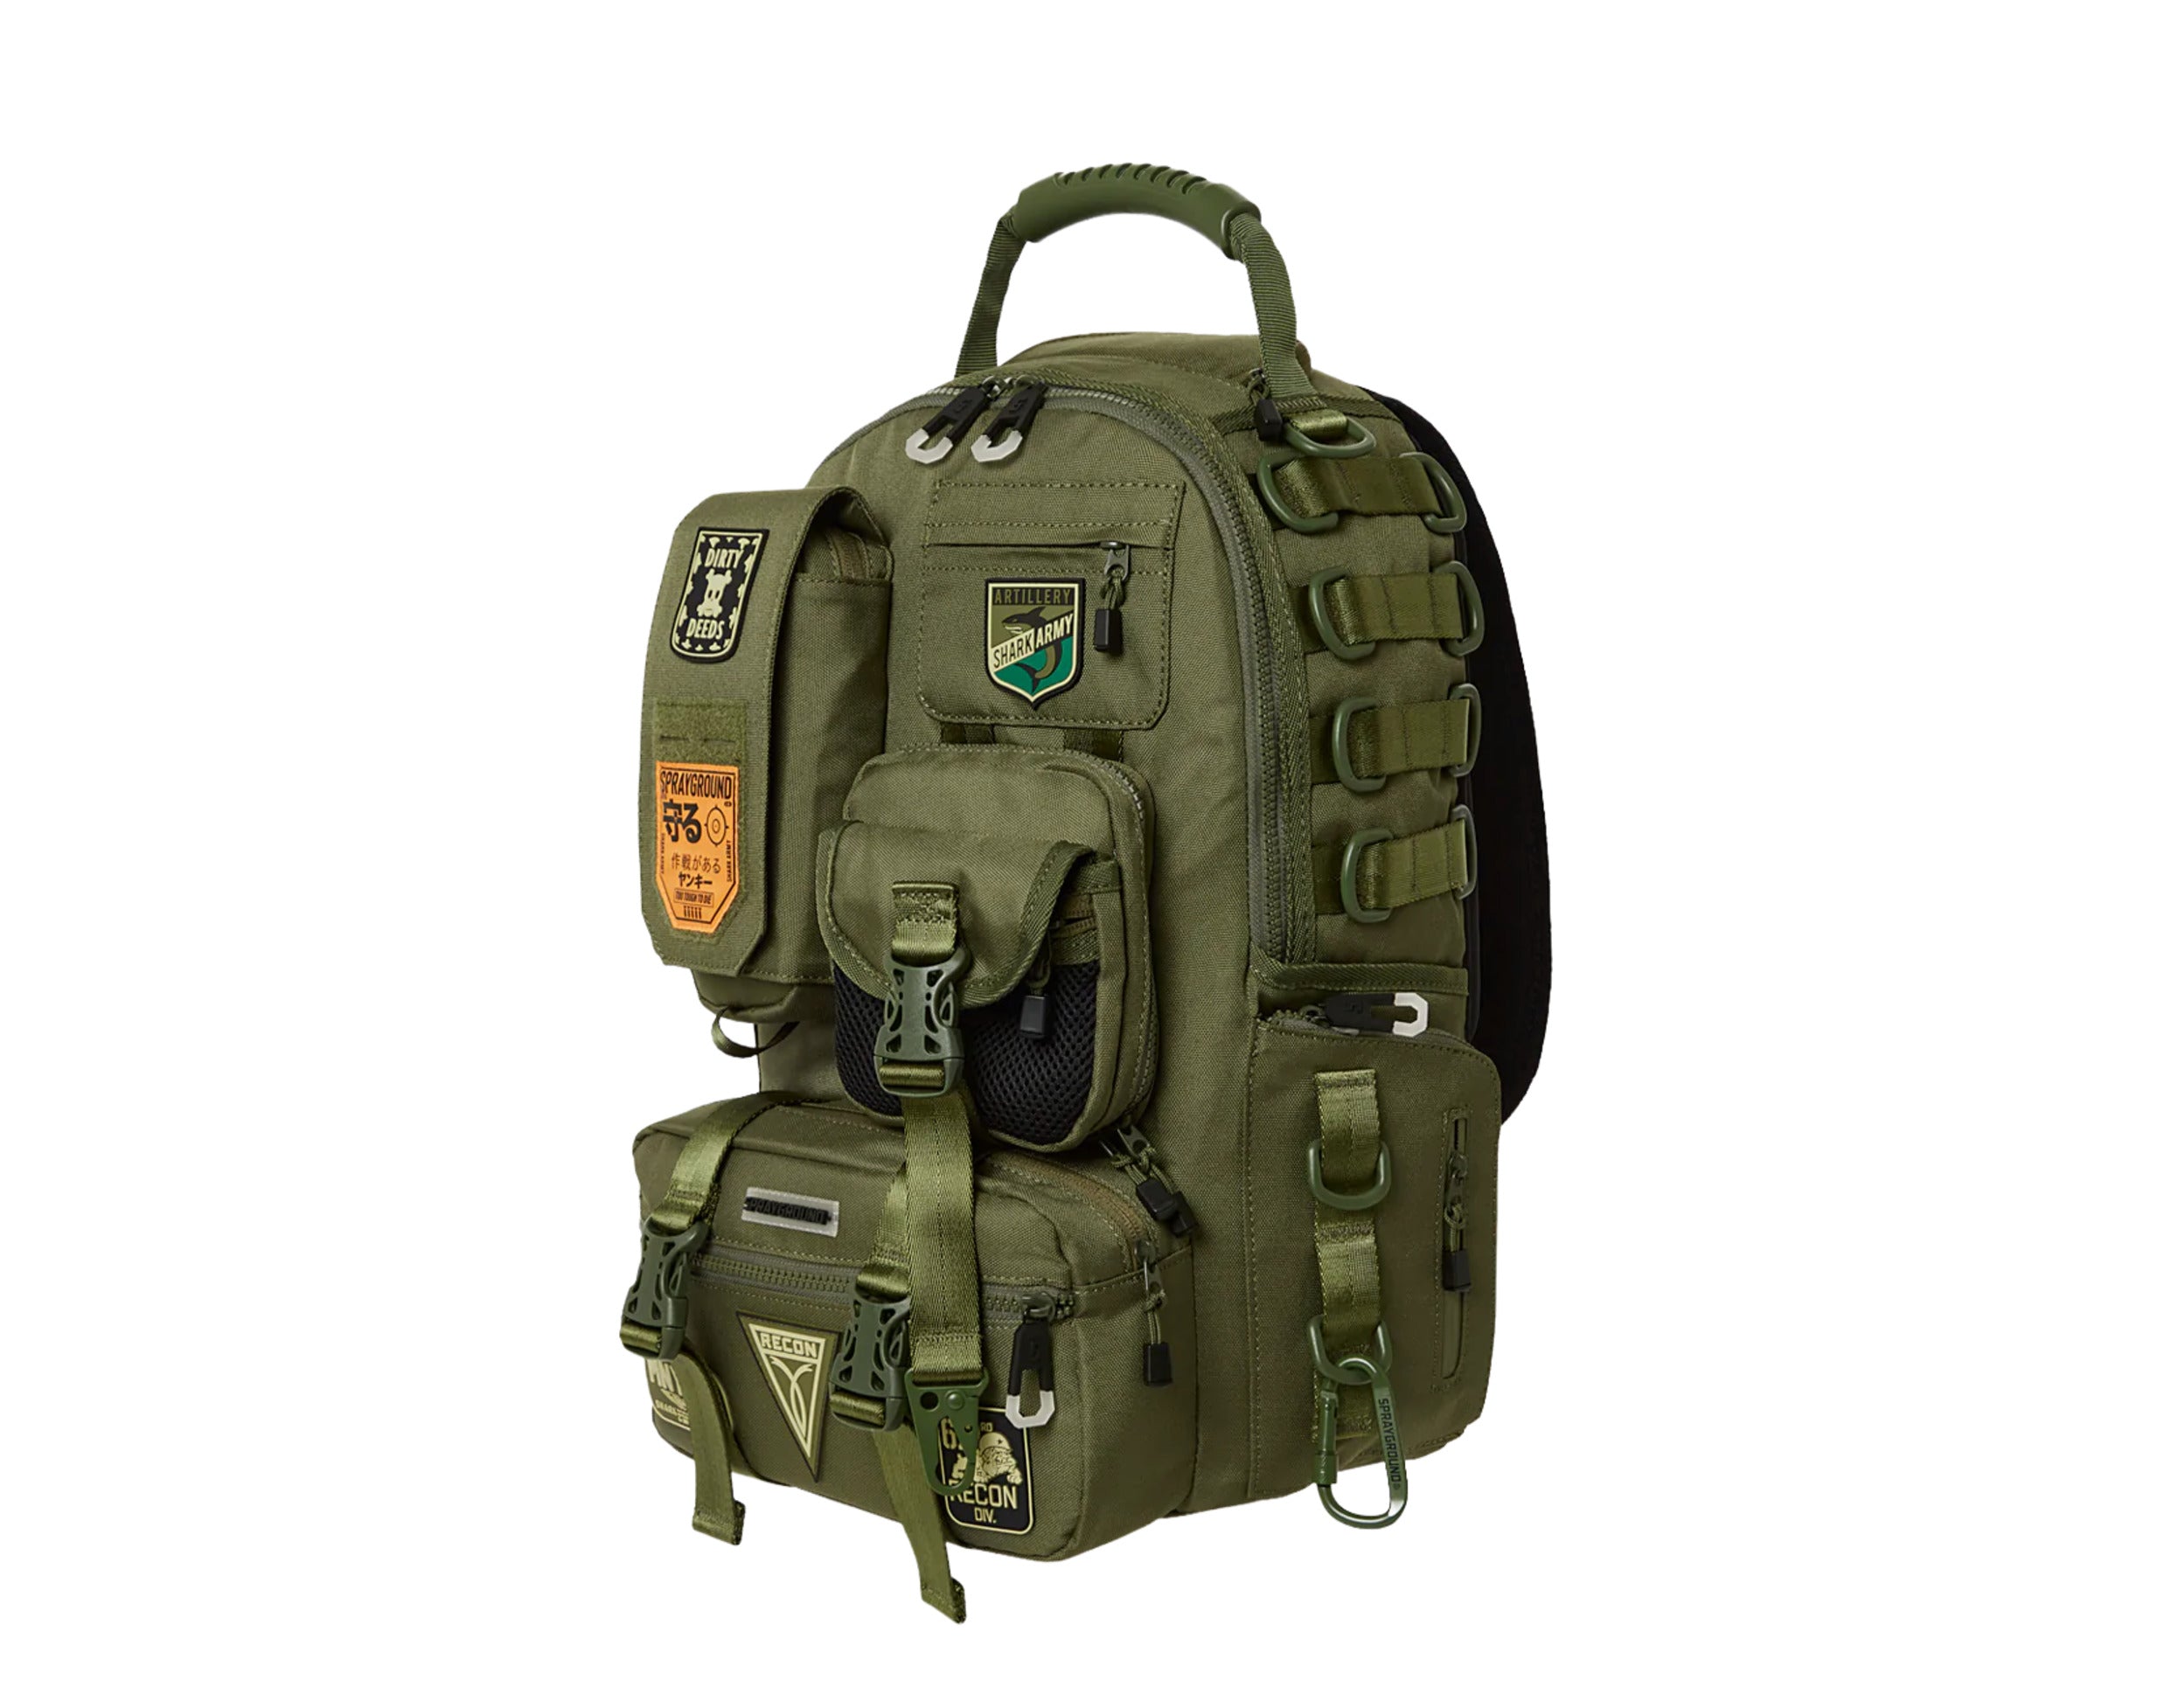 SPECIAL OPS BACKPACK 3.0